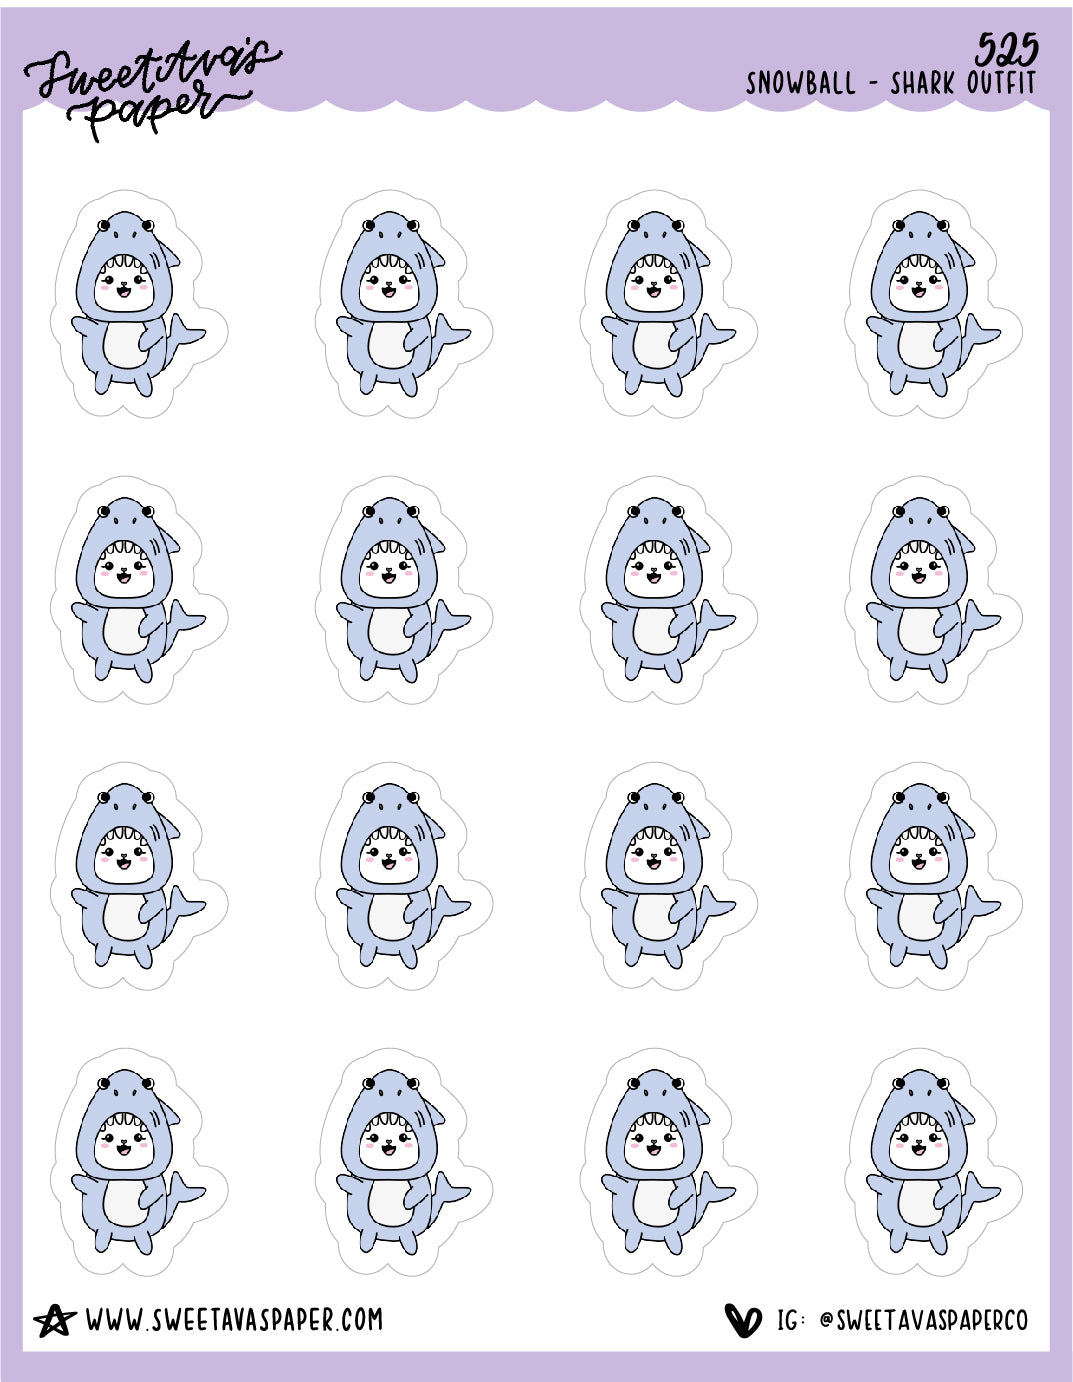 Shark Suit Planner Stickers - Snowball The Cat - [525]